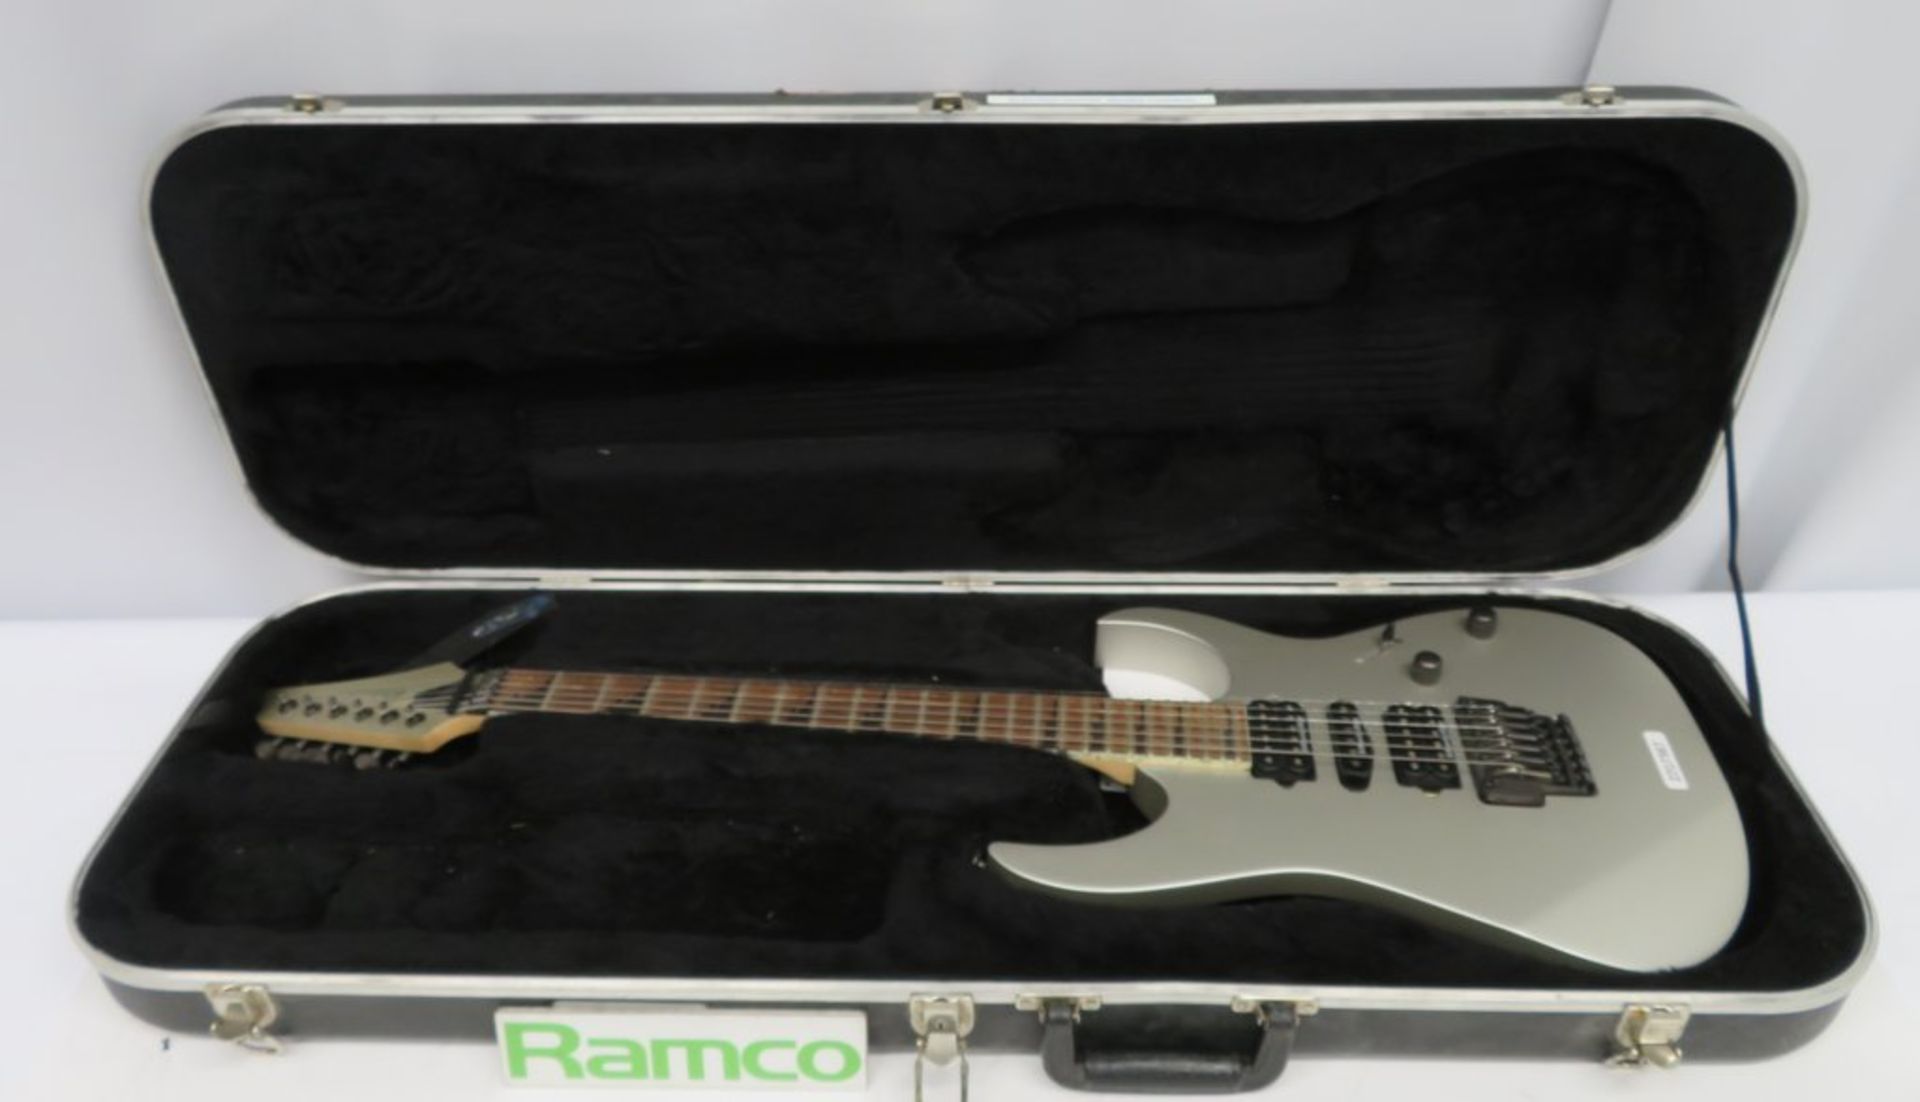 Ibanez Prestige Electric Guitar Complete With Hard Transit Case. Serial Nnumber: F0306044.